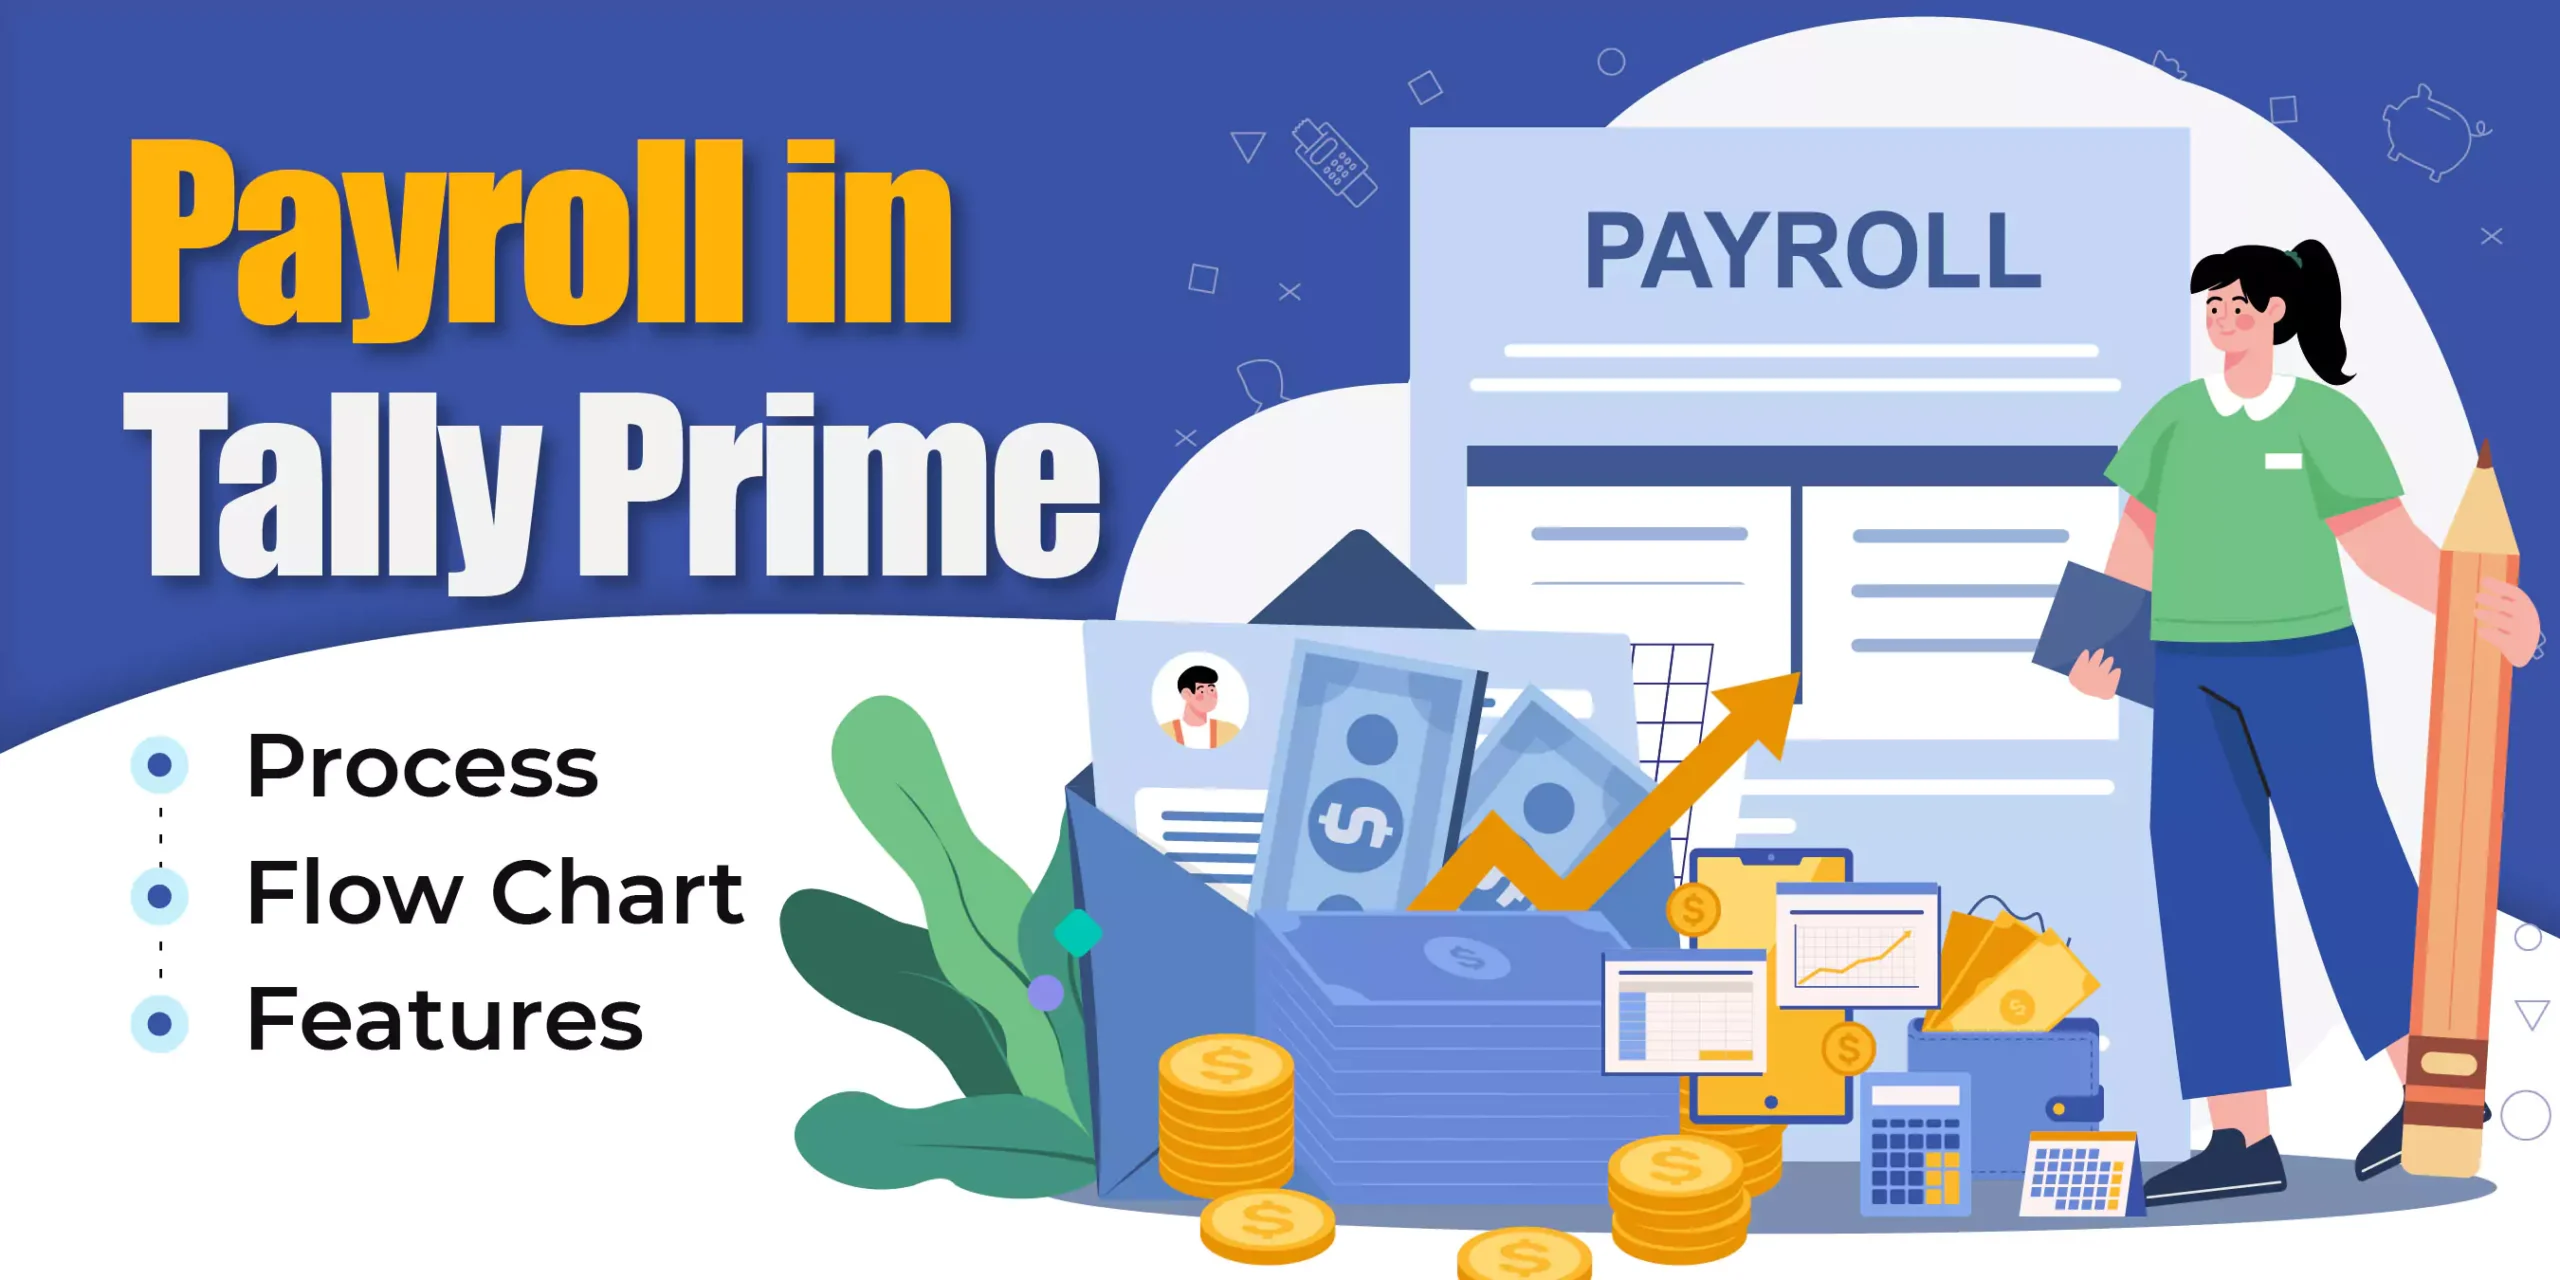 Payroll in Tally Prime: Process, Flow Chart, Features